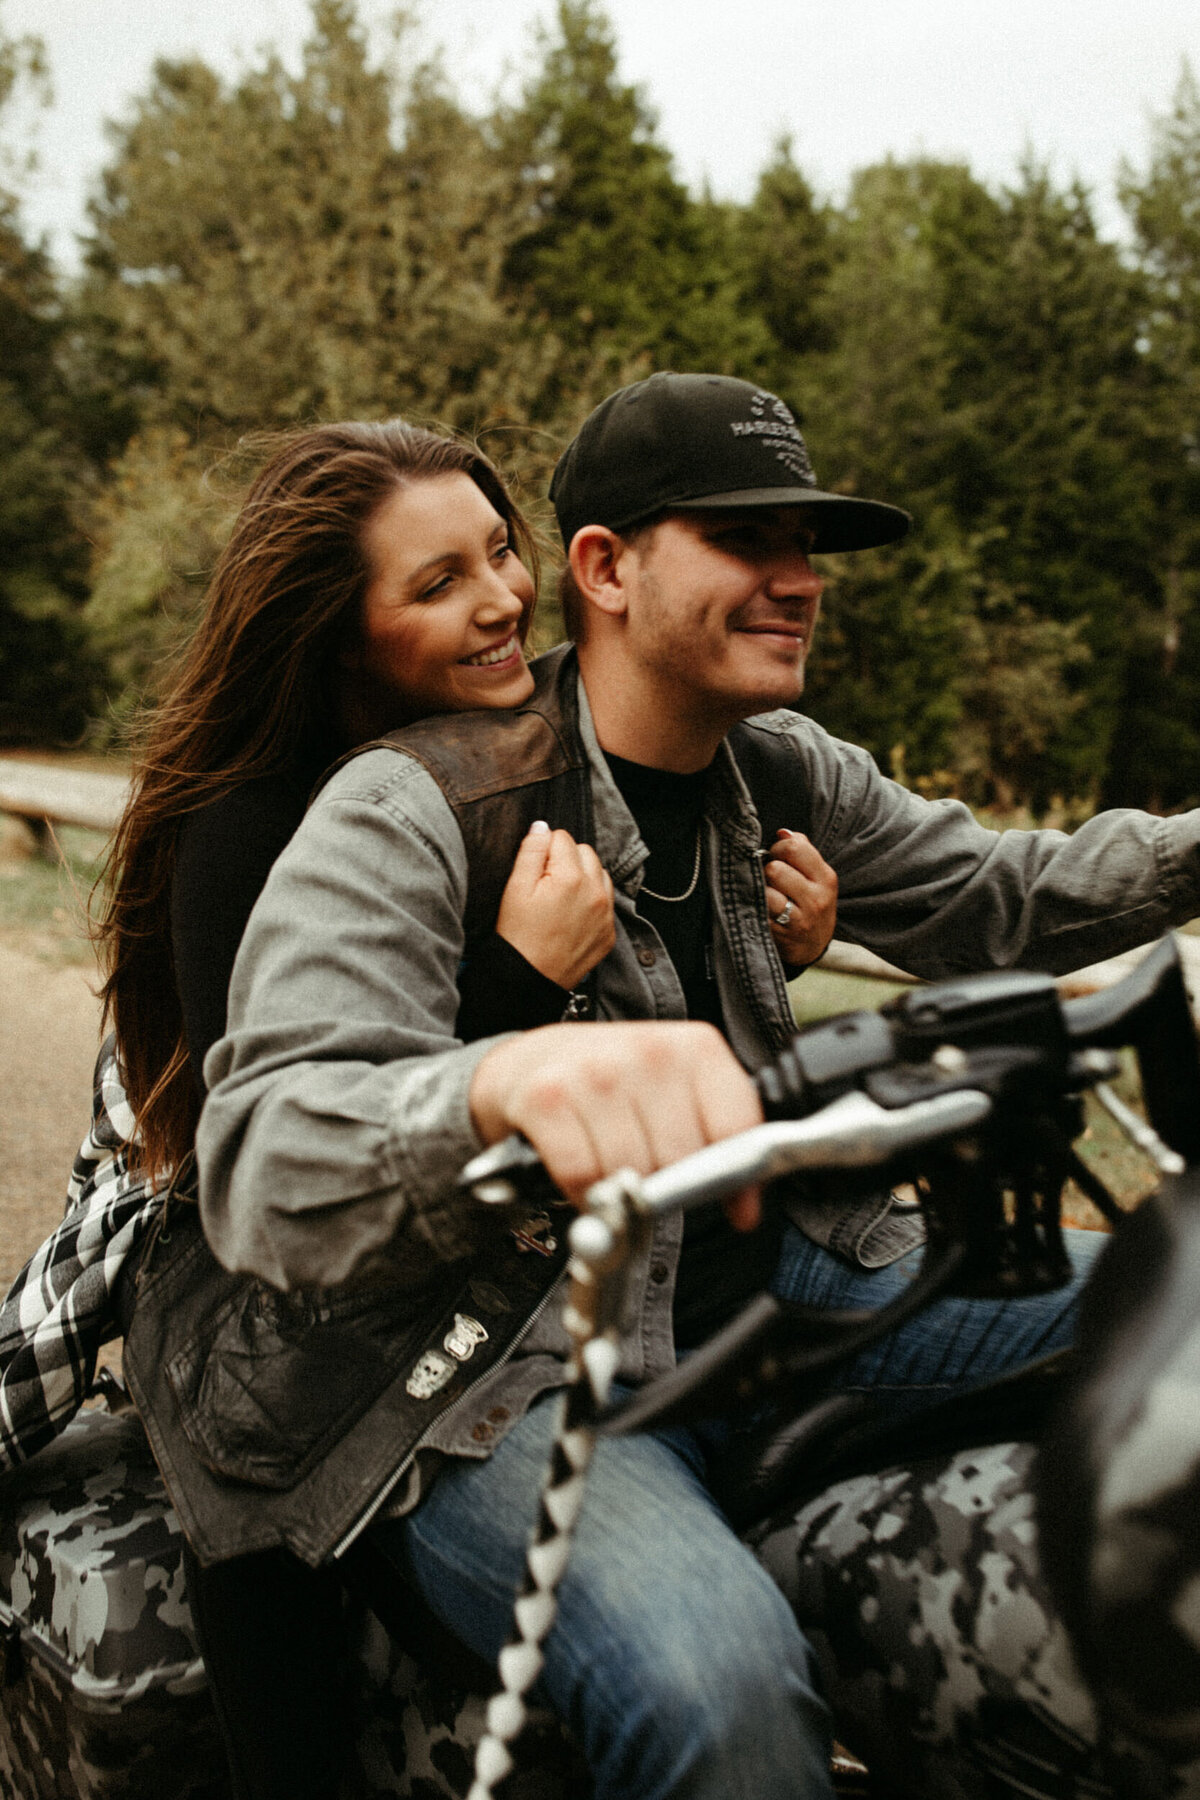 motorcycle-couple-engagement-session-bikers-bike-st-george-southern-utah-2